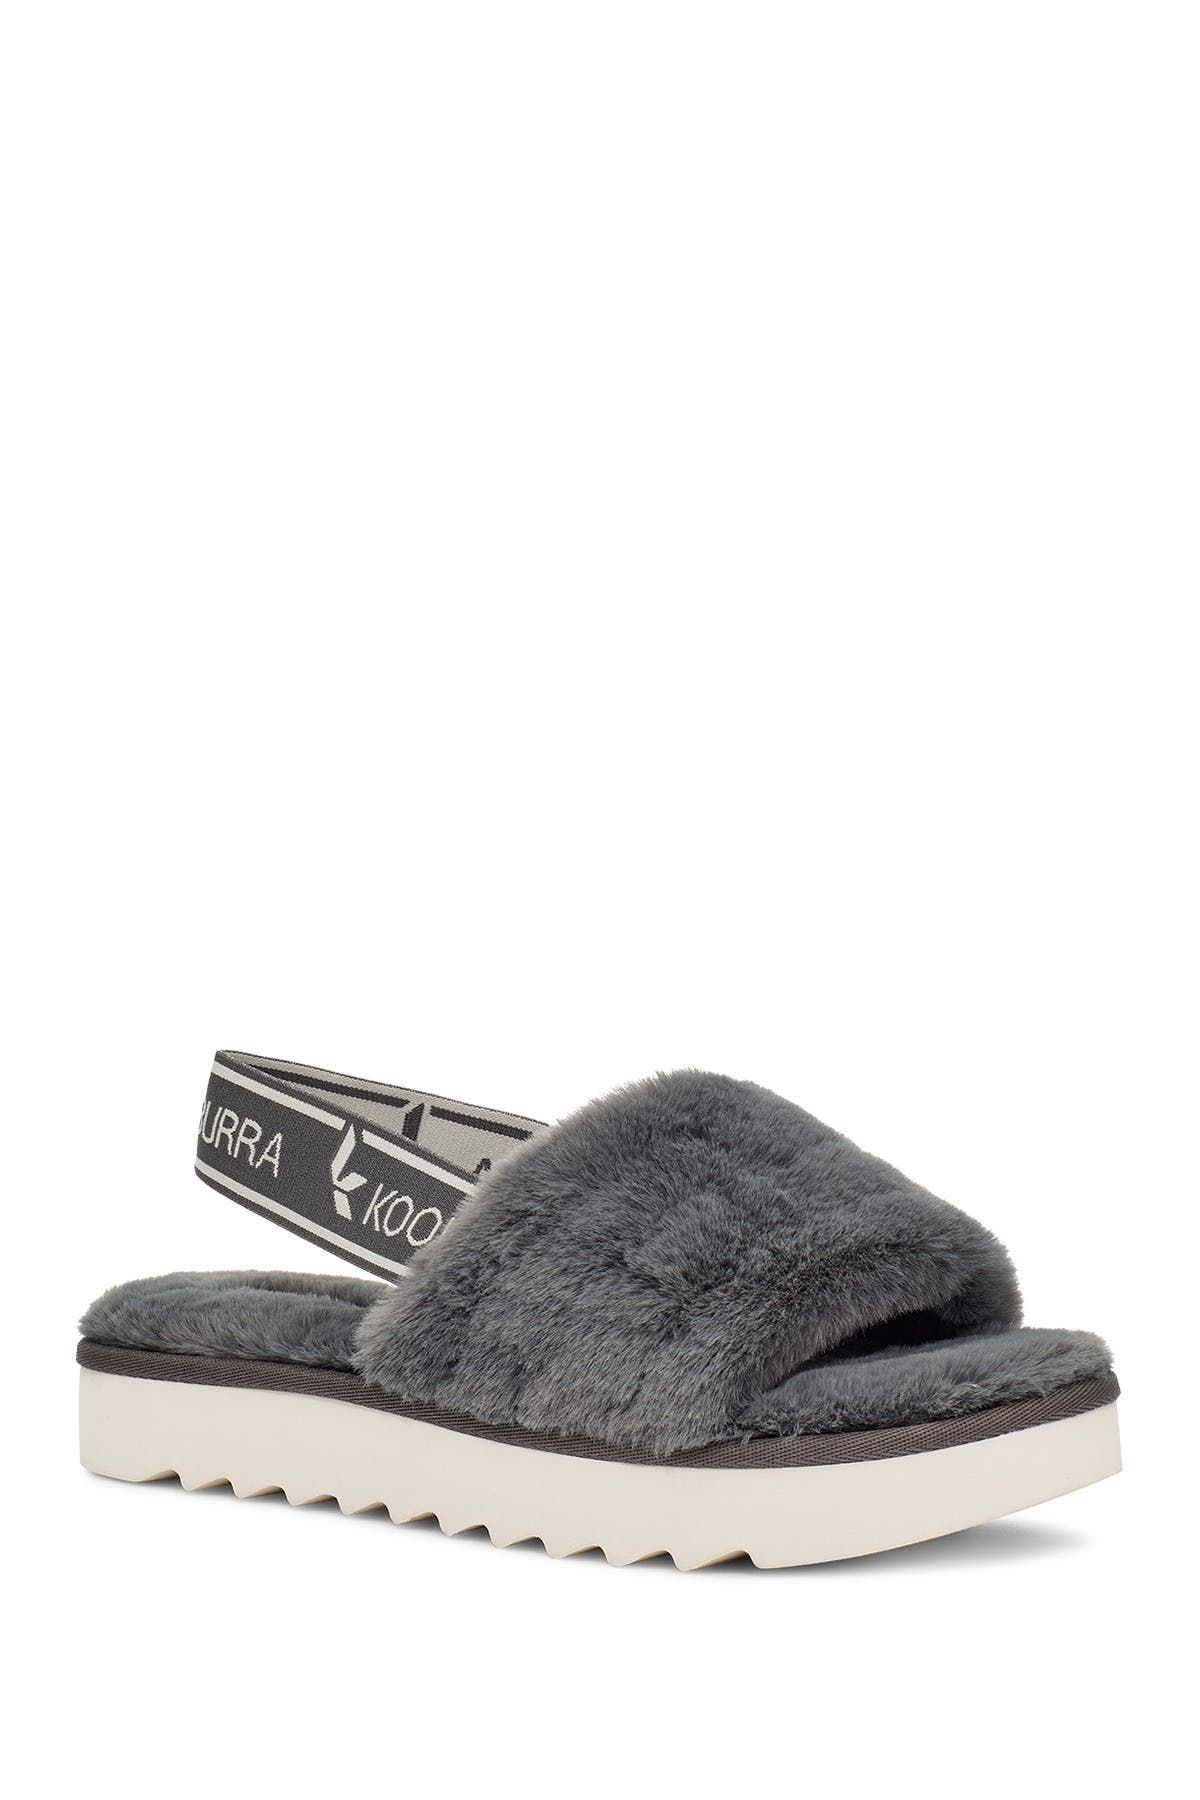 Slippers: Shearling, Leather, Fur 